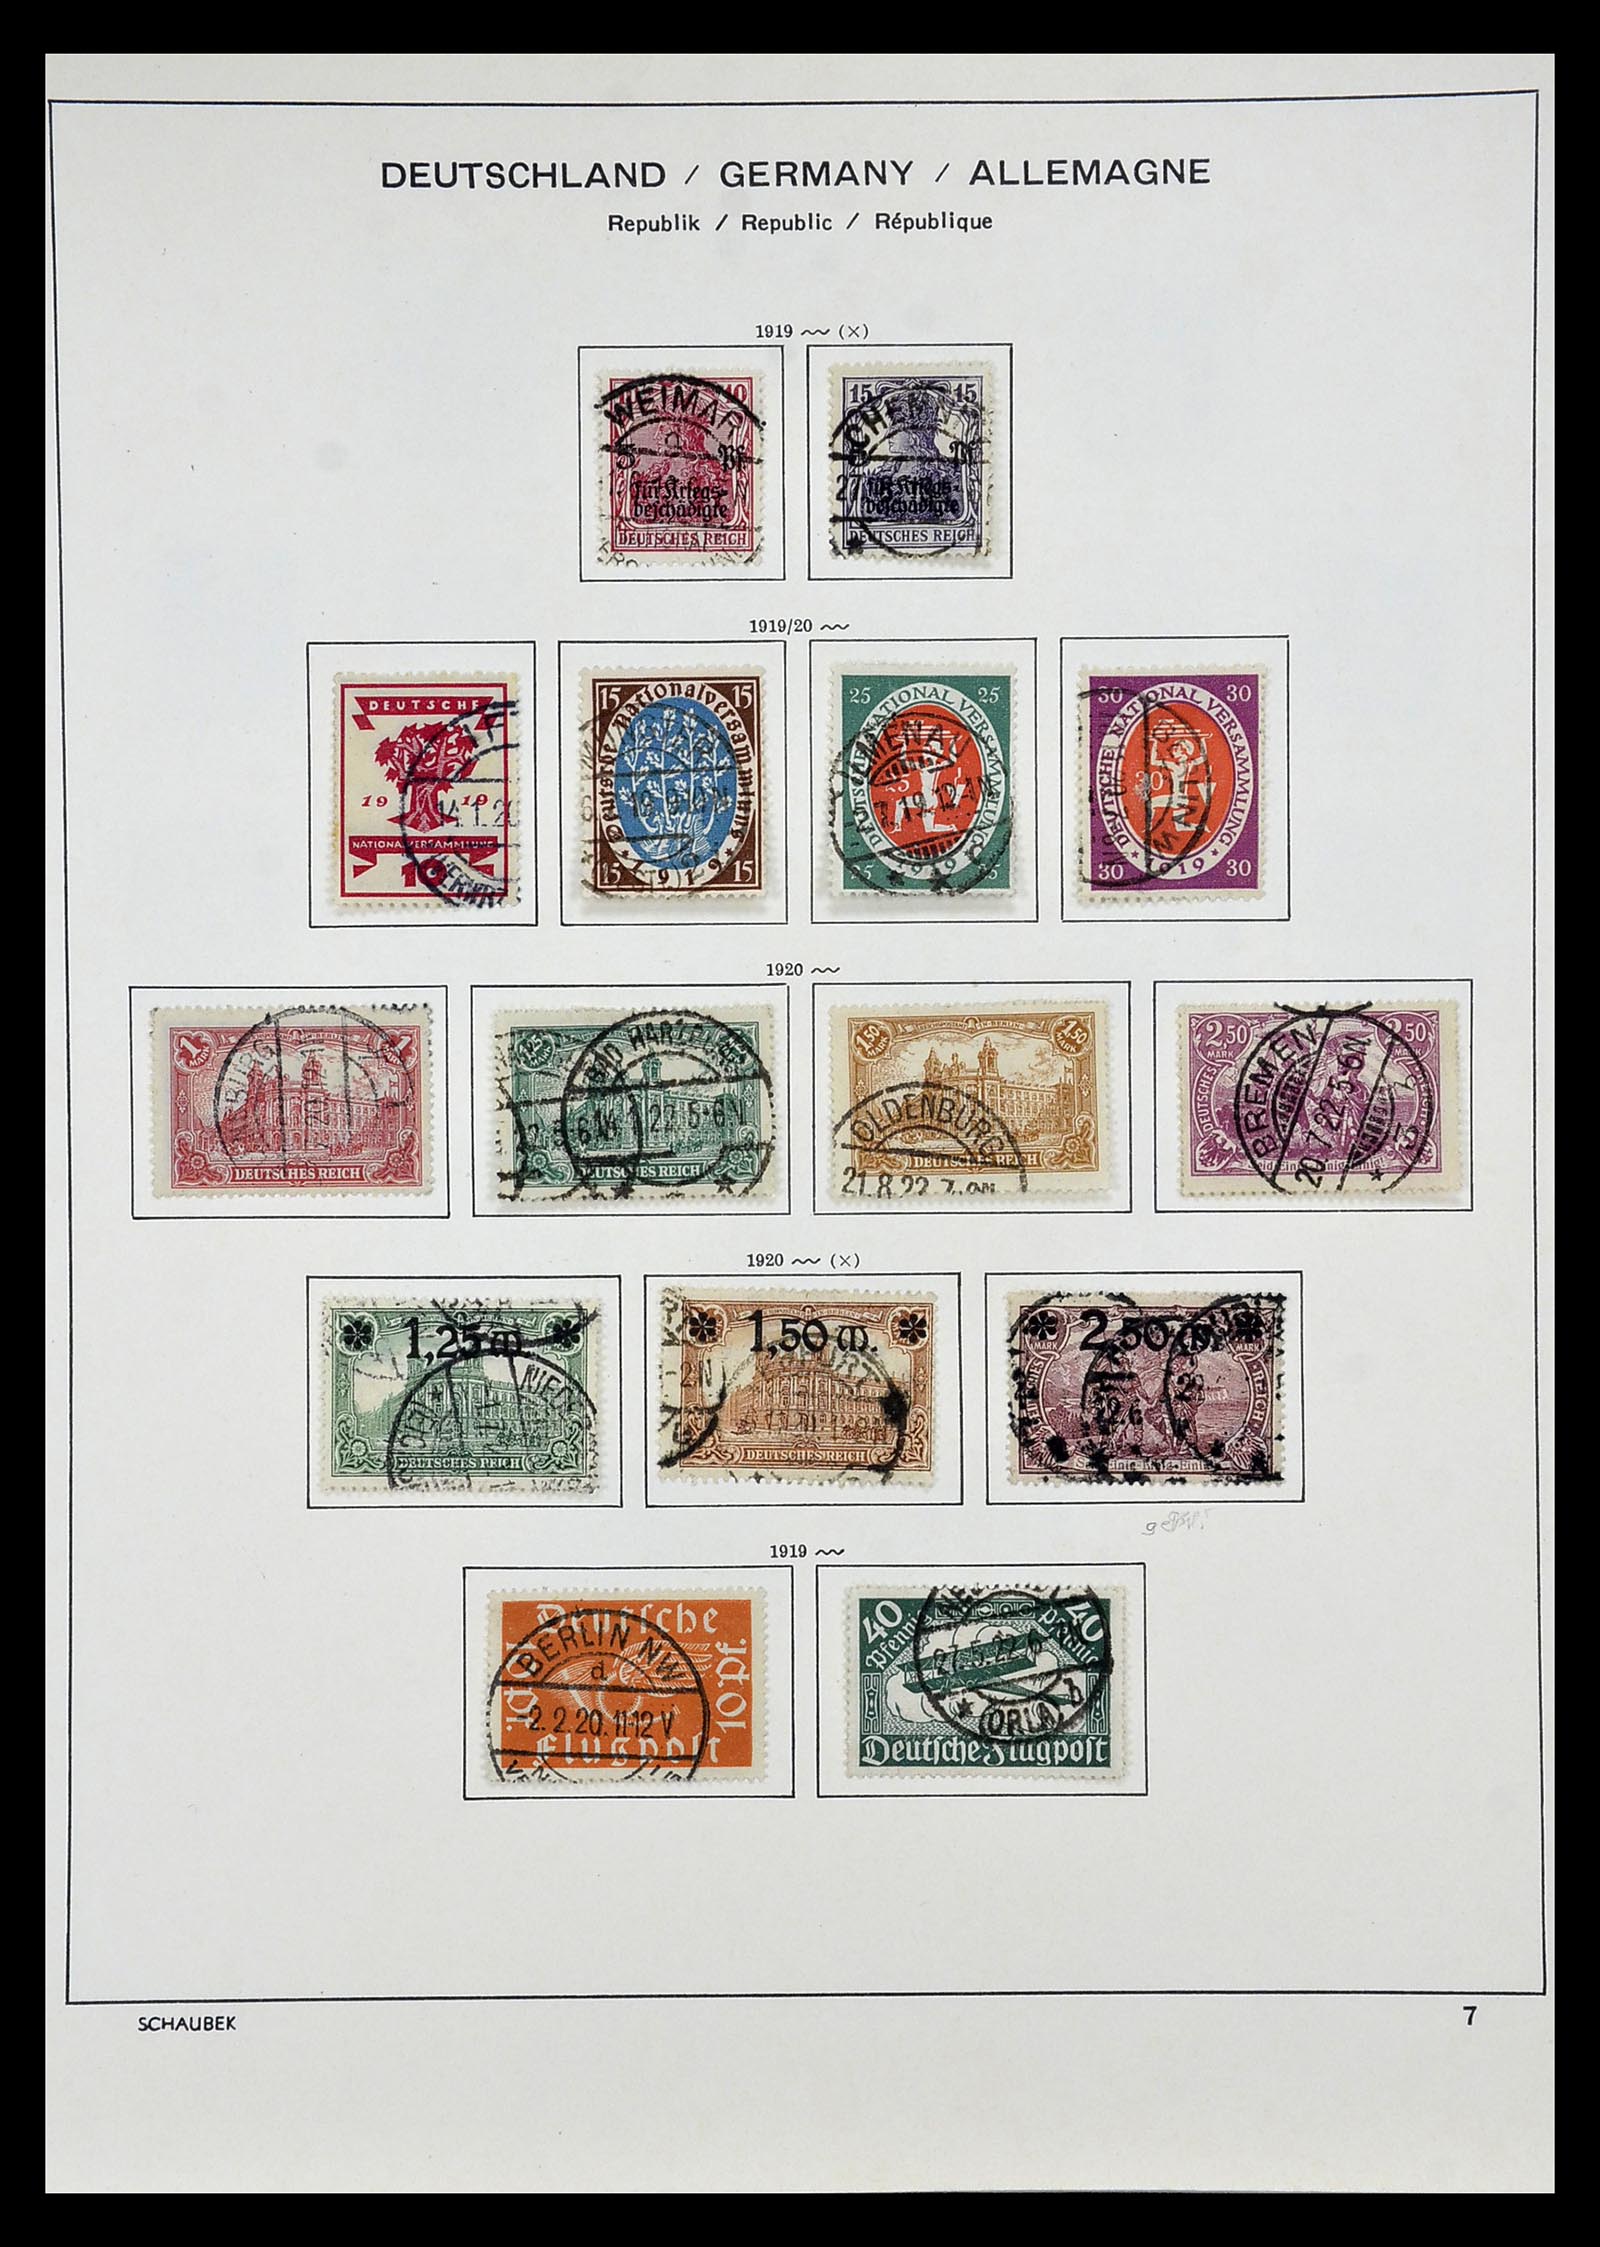 35006 001 - Stamp Collection 35006 German Reich infla 1919-1923.